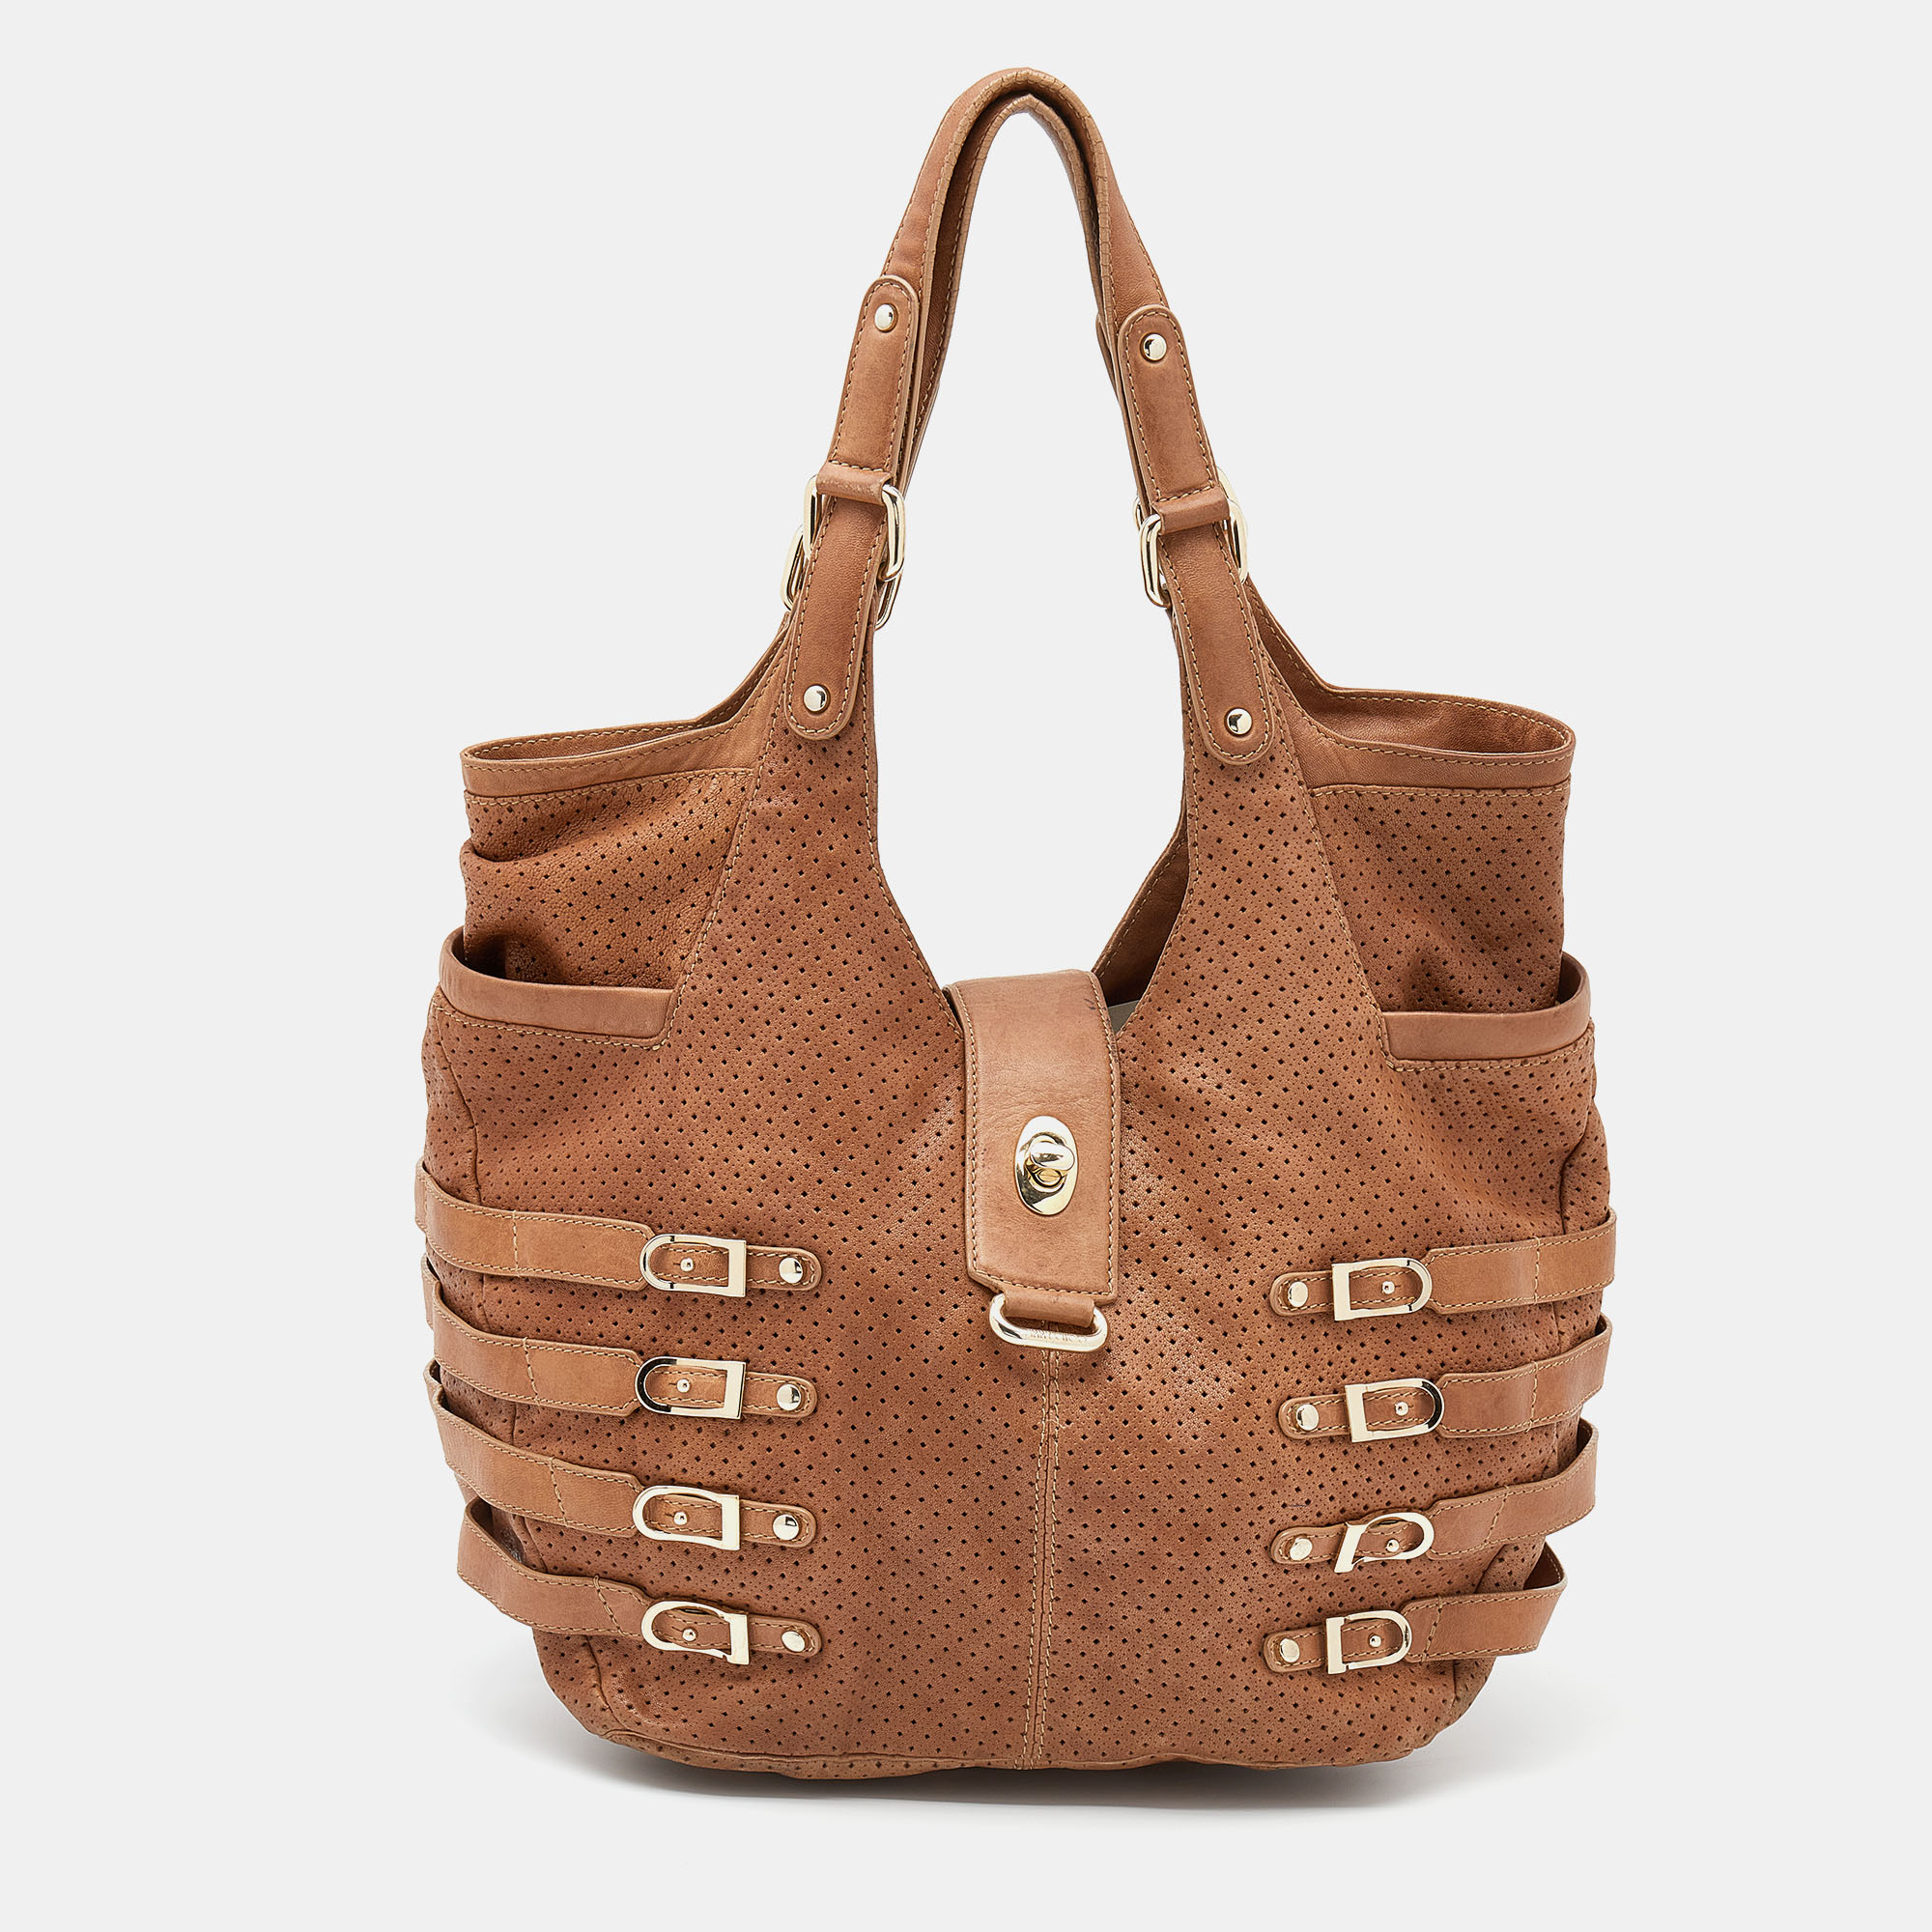 Elegance meets luxury in this Bardia bag from the House of Jimmy Choo. It is created using brown perforated leather. It has an Alcantara lined interior silver tone hardware and a 28 cm handle drop. This bag will elevate your look immediately